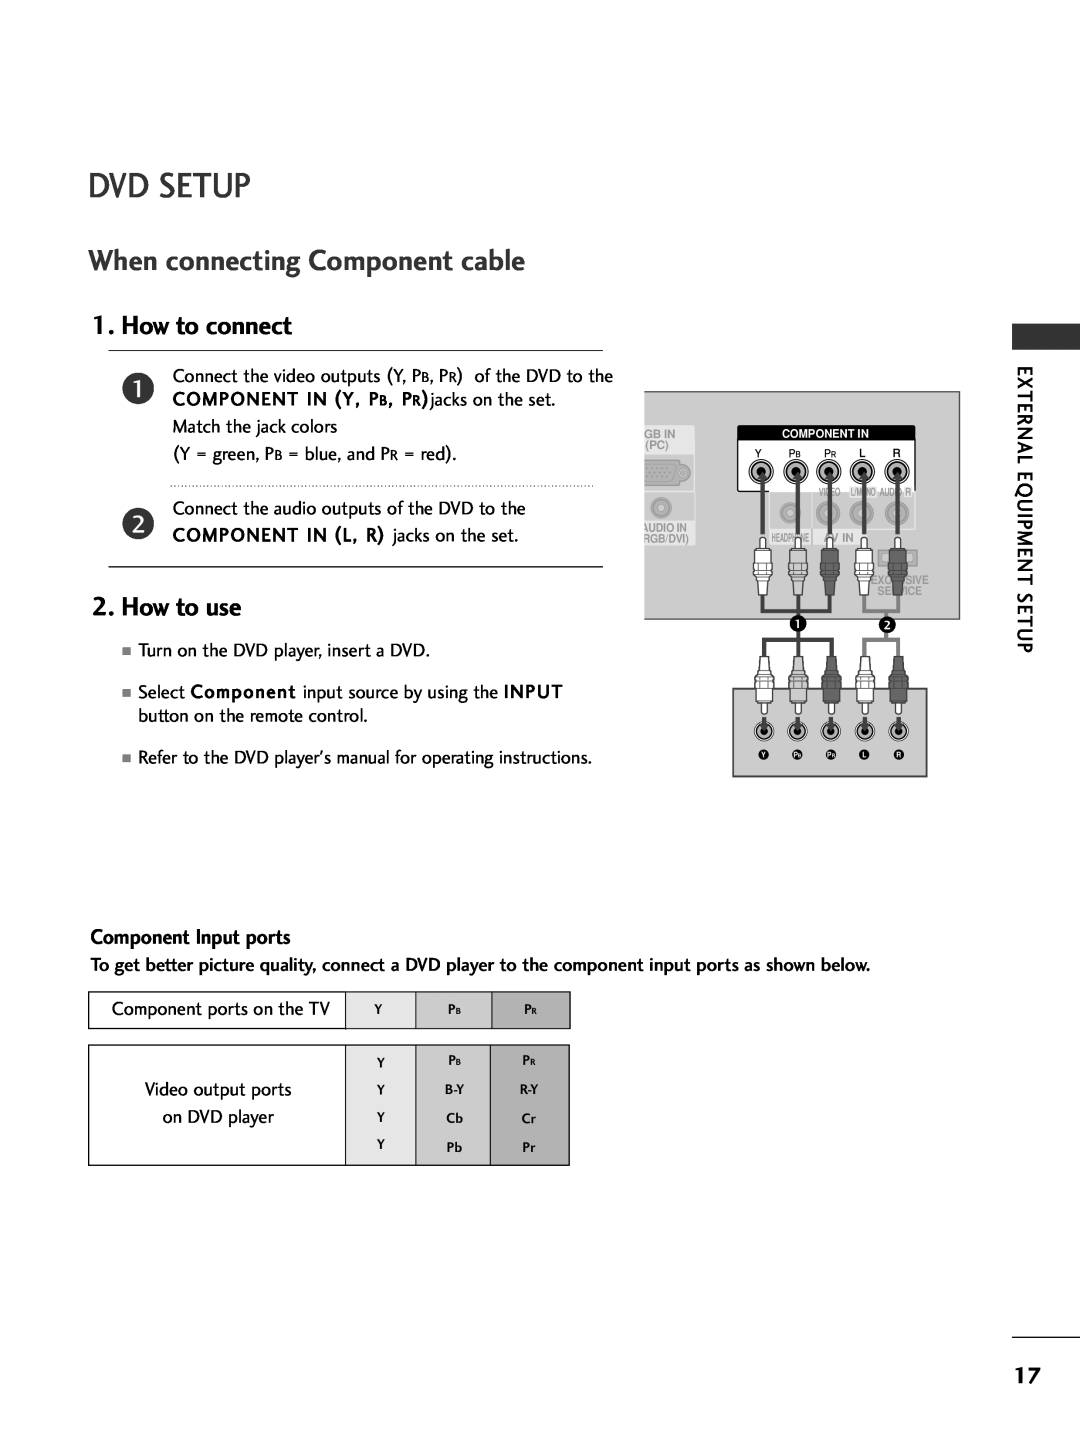 LG Electronics 32PC5DVC Dvd Setup, Component Input ports, Refer to the DVD players manual for operating instructions 